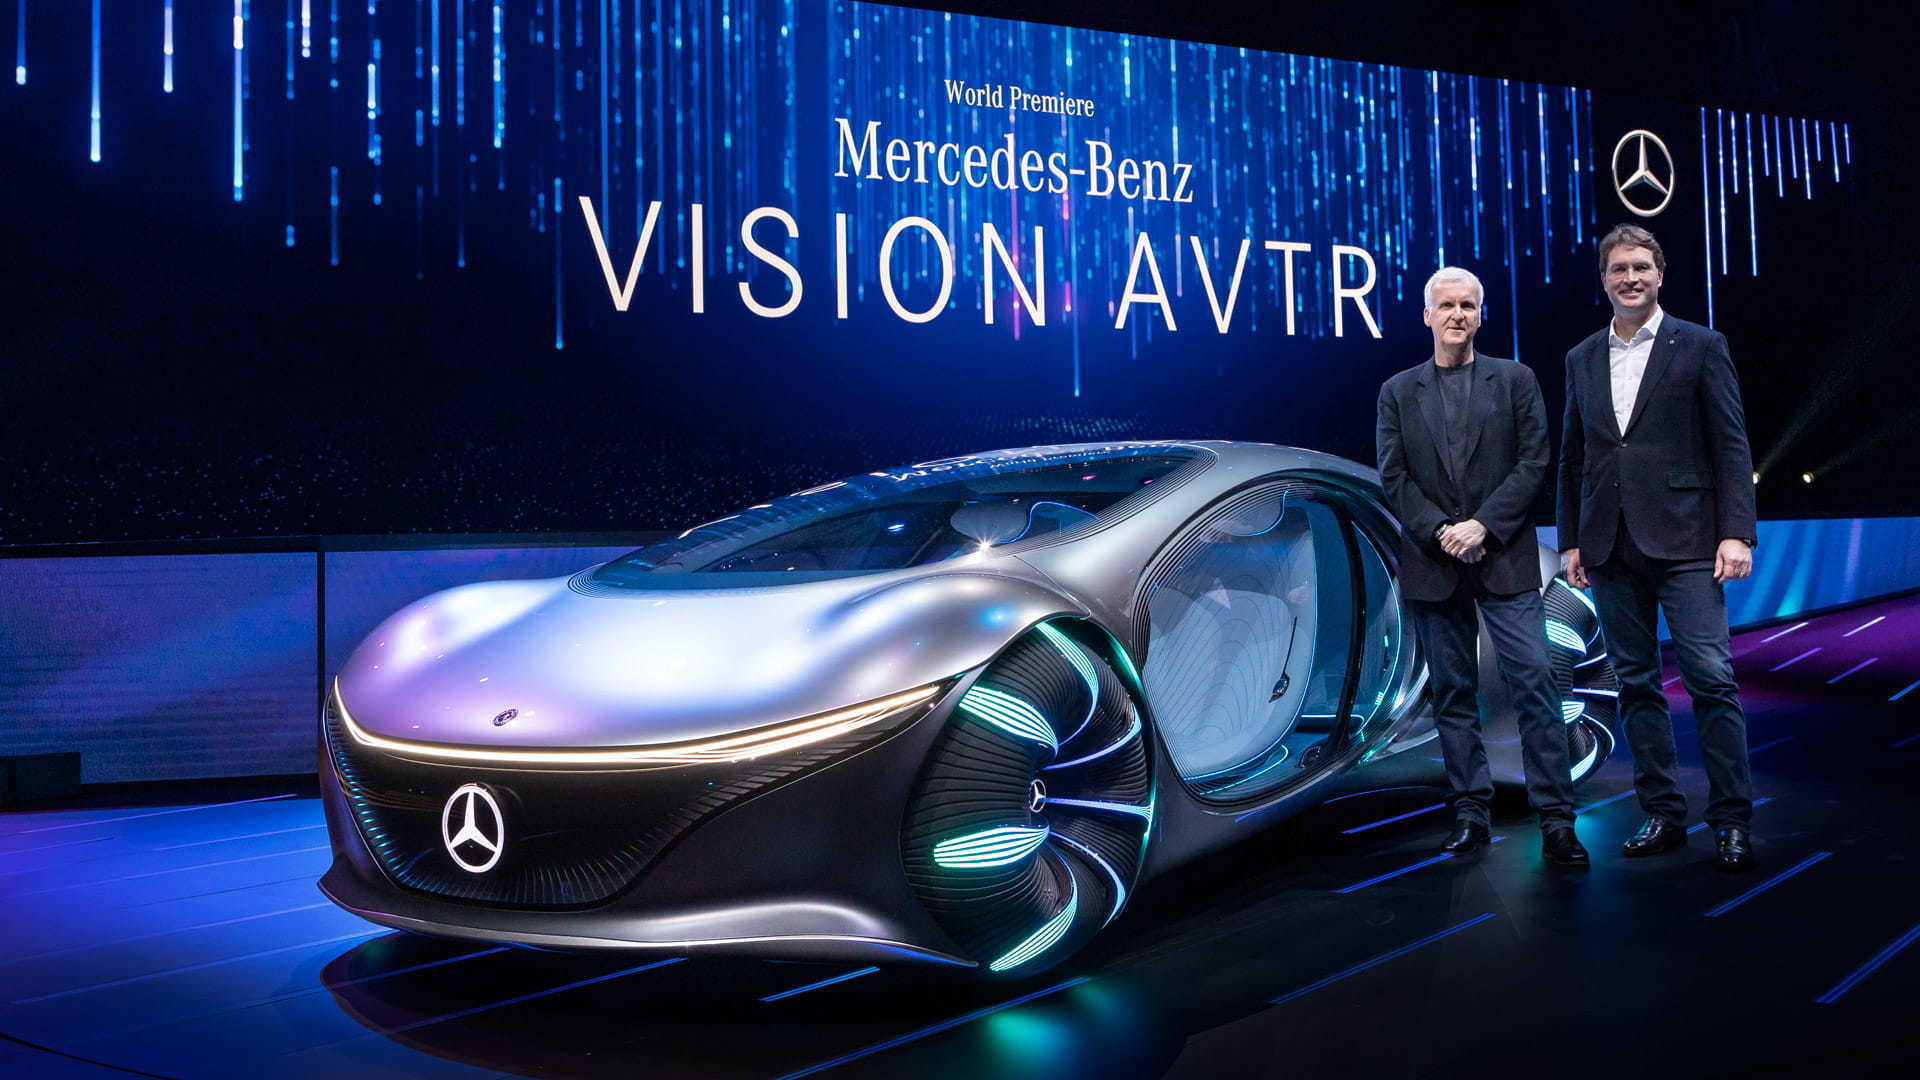 Director James Cameron and Mercedes-Benz CEO, Ola Källenius pose with the VISION AVTR at CES 2020.